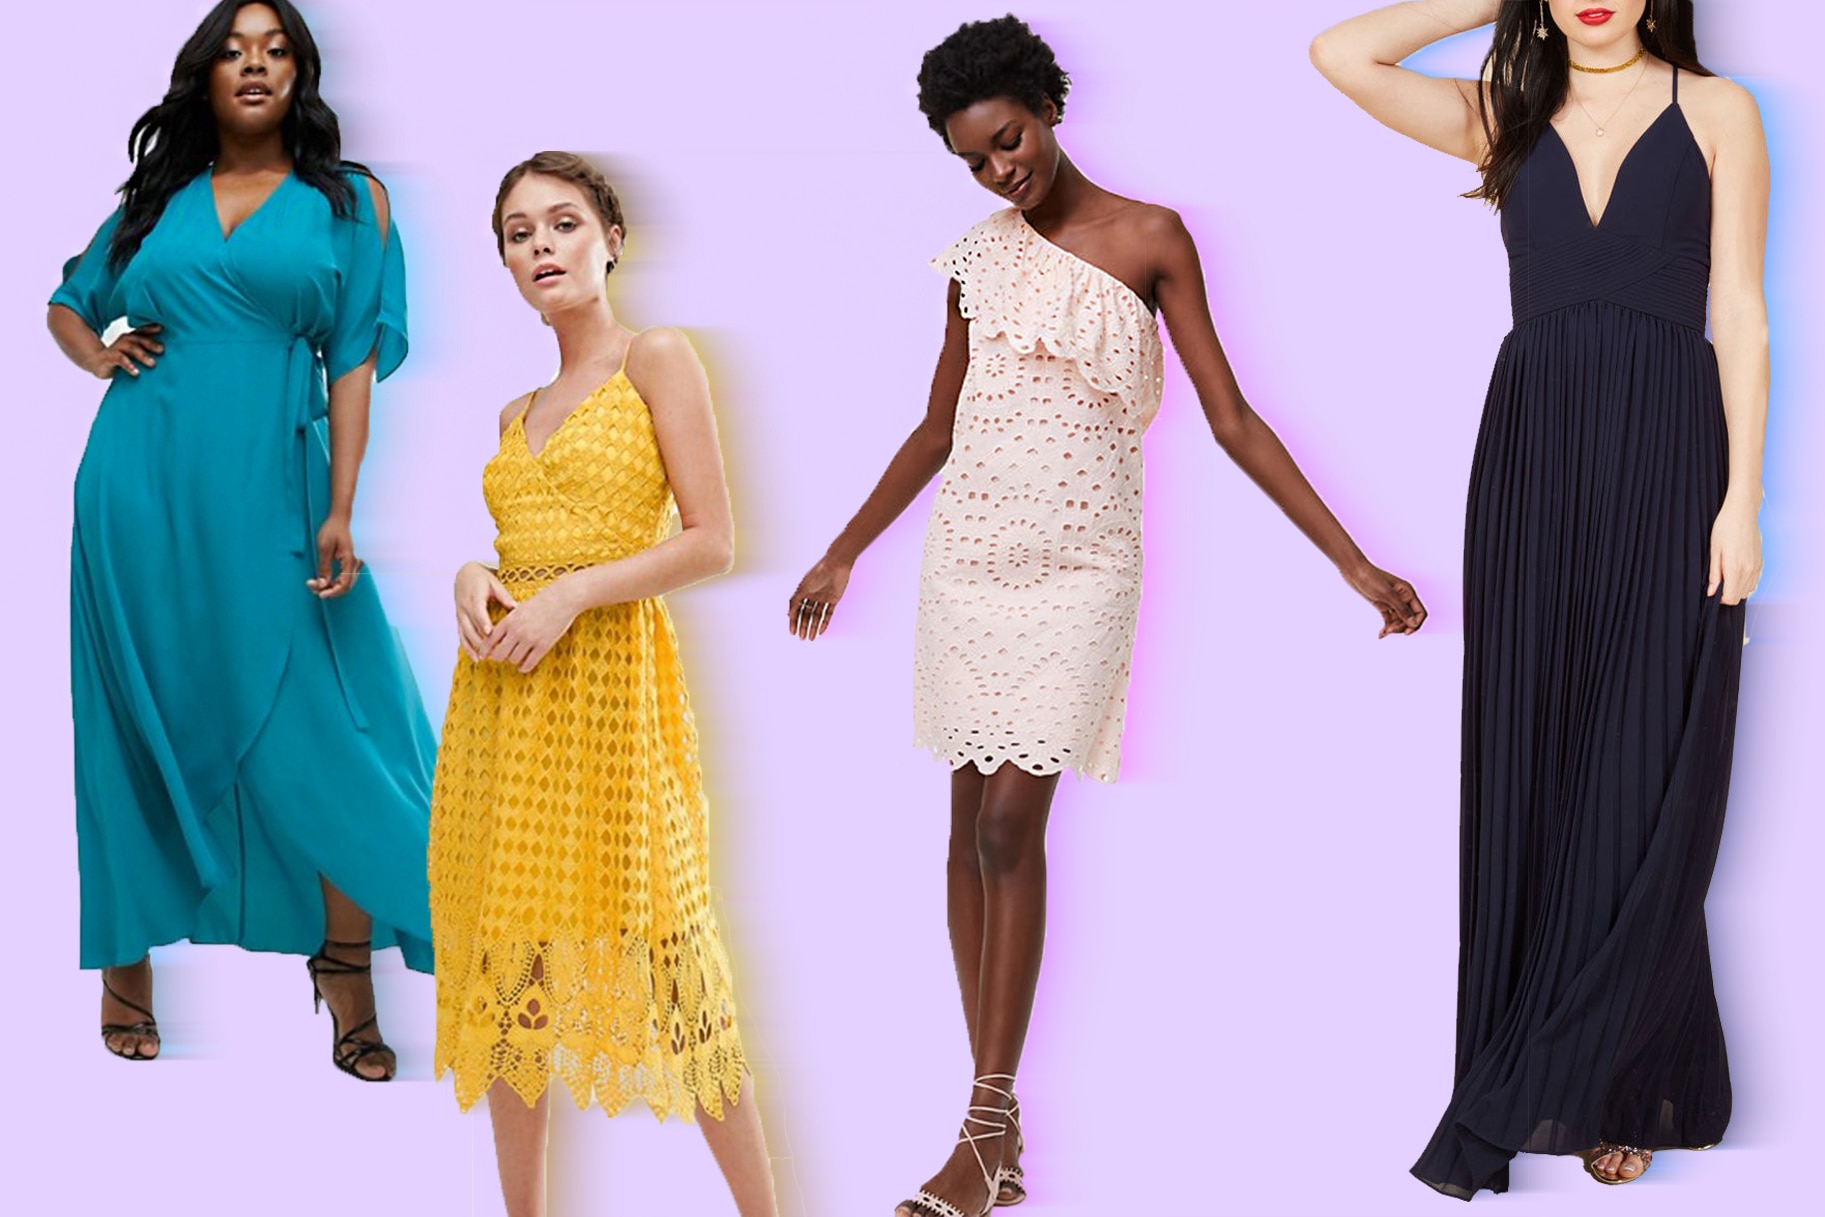 Shop 20 Bridesmaid Dresses Under $200 | The Daily Dish